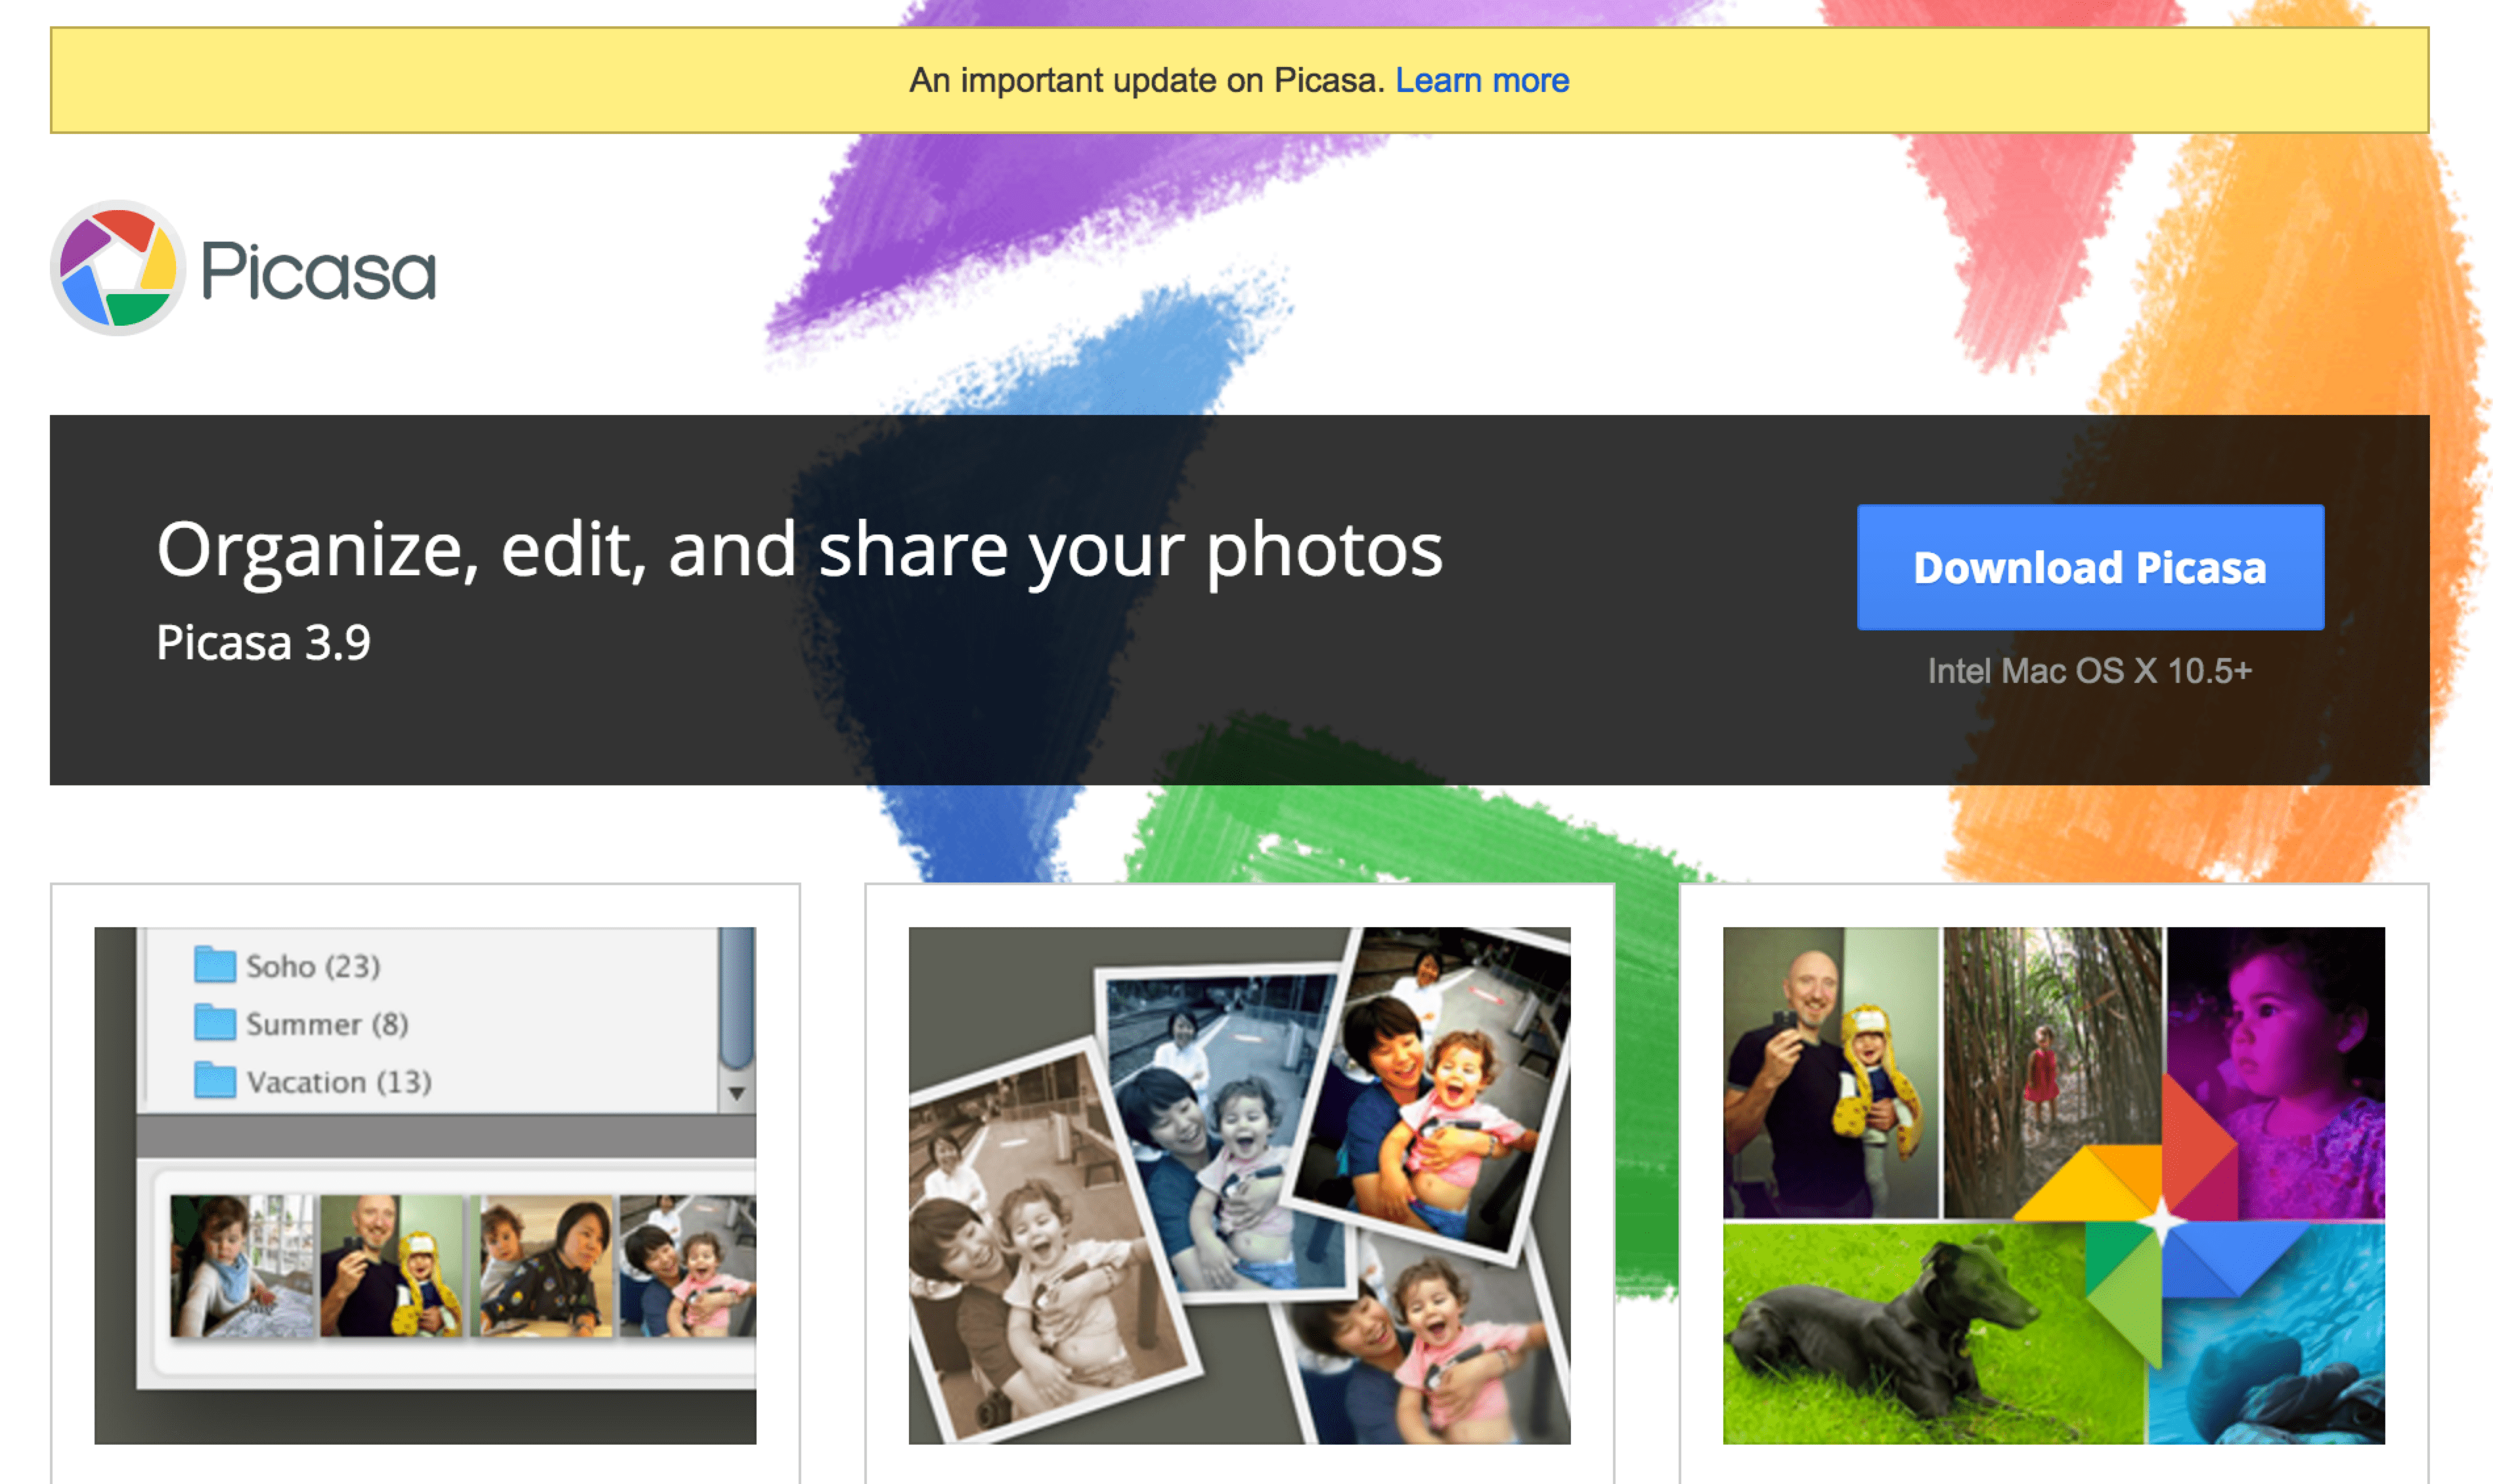 Find detailed information about Picasa